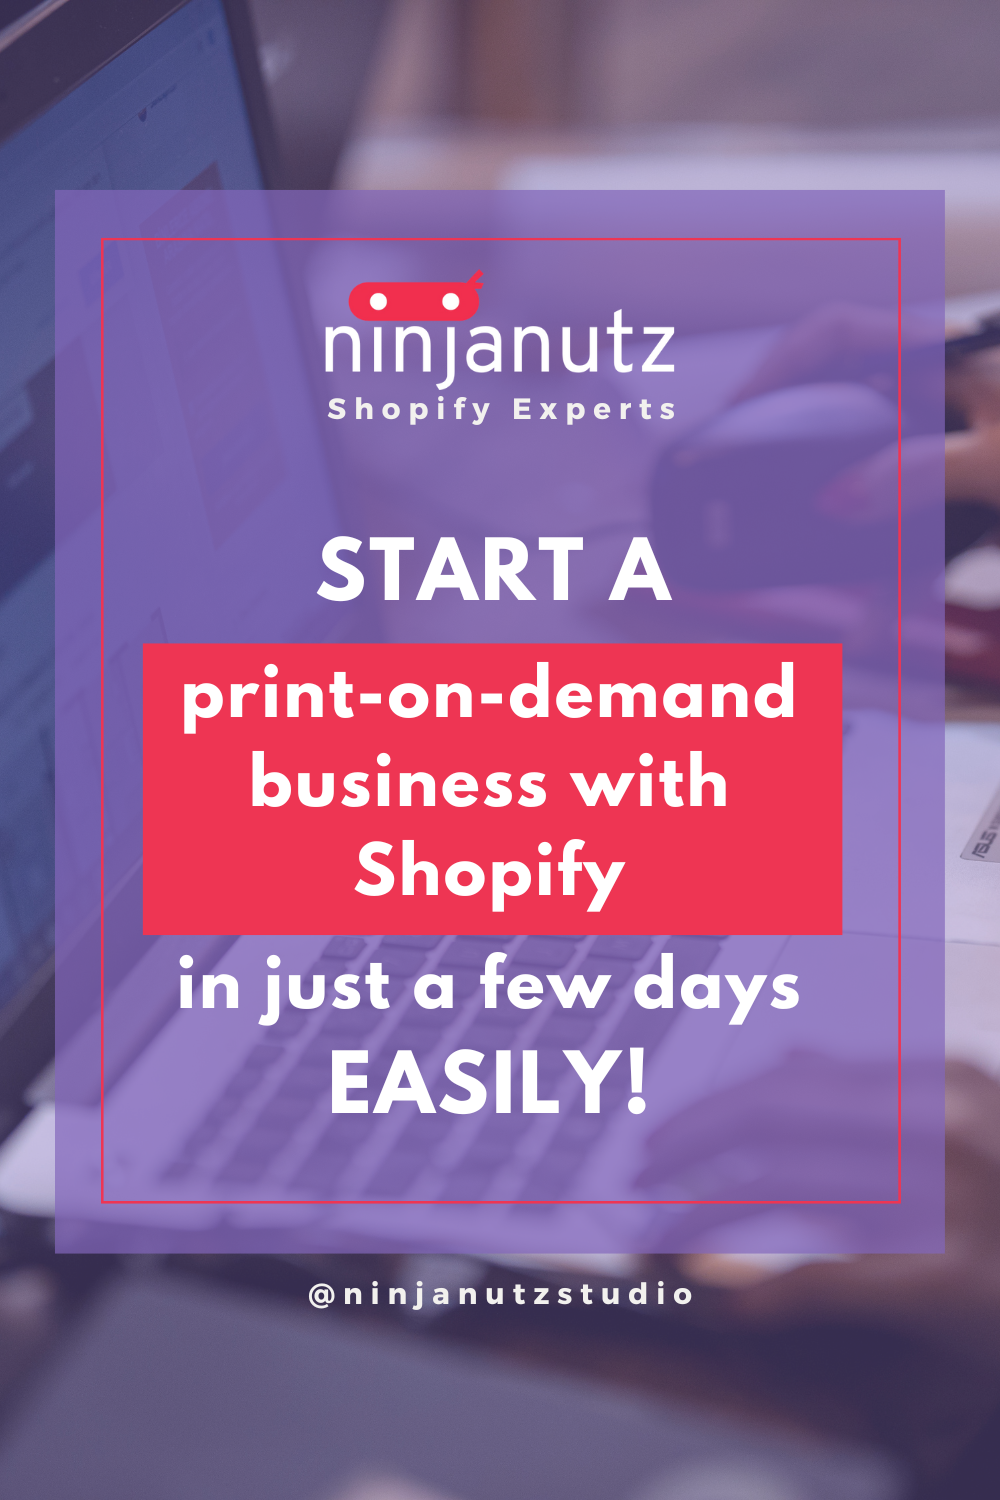 Start a print-on-demand business with Shopify in just a few days easily! NinjaNutz®